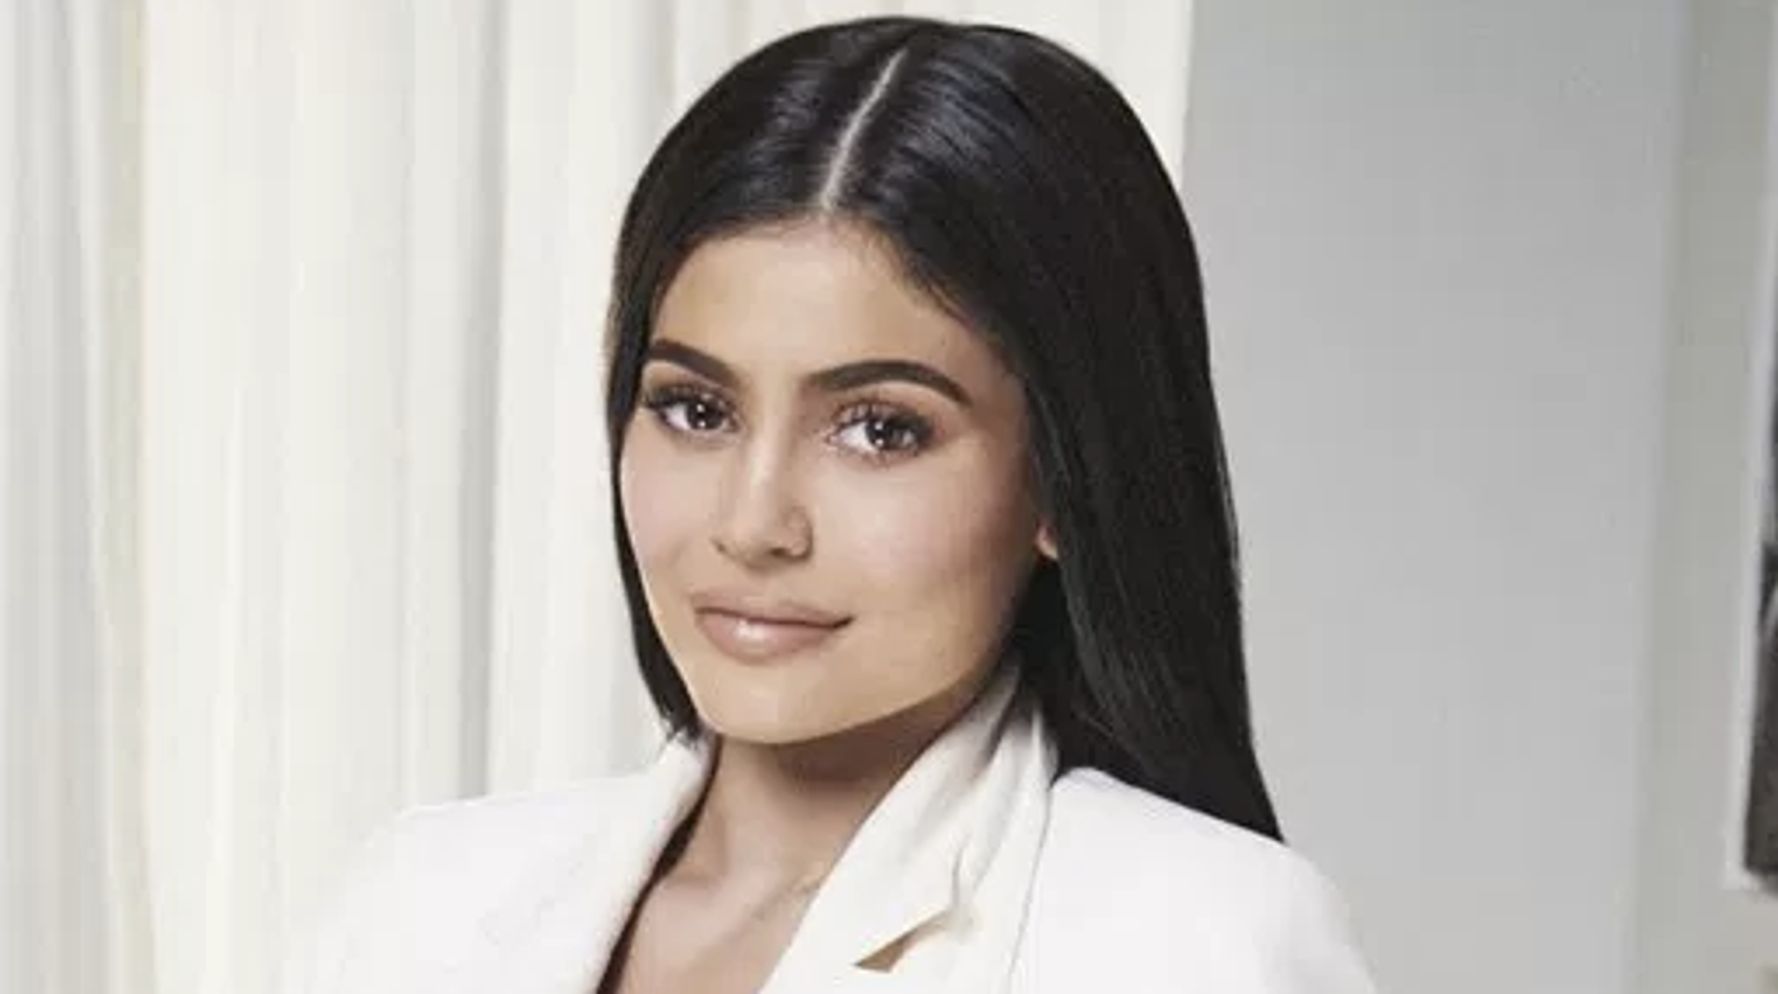 How Kylie Jenner turned Kylie Cosmetics into a $420 million empire